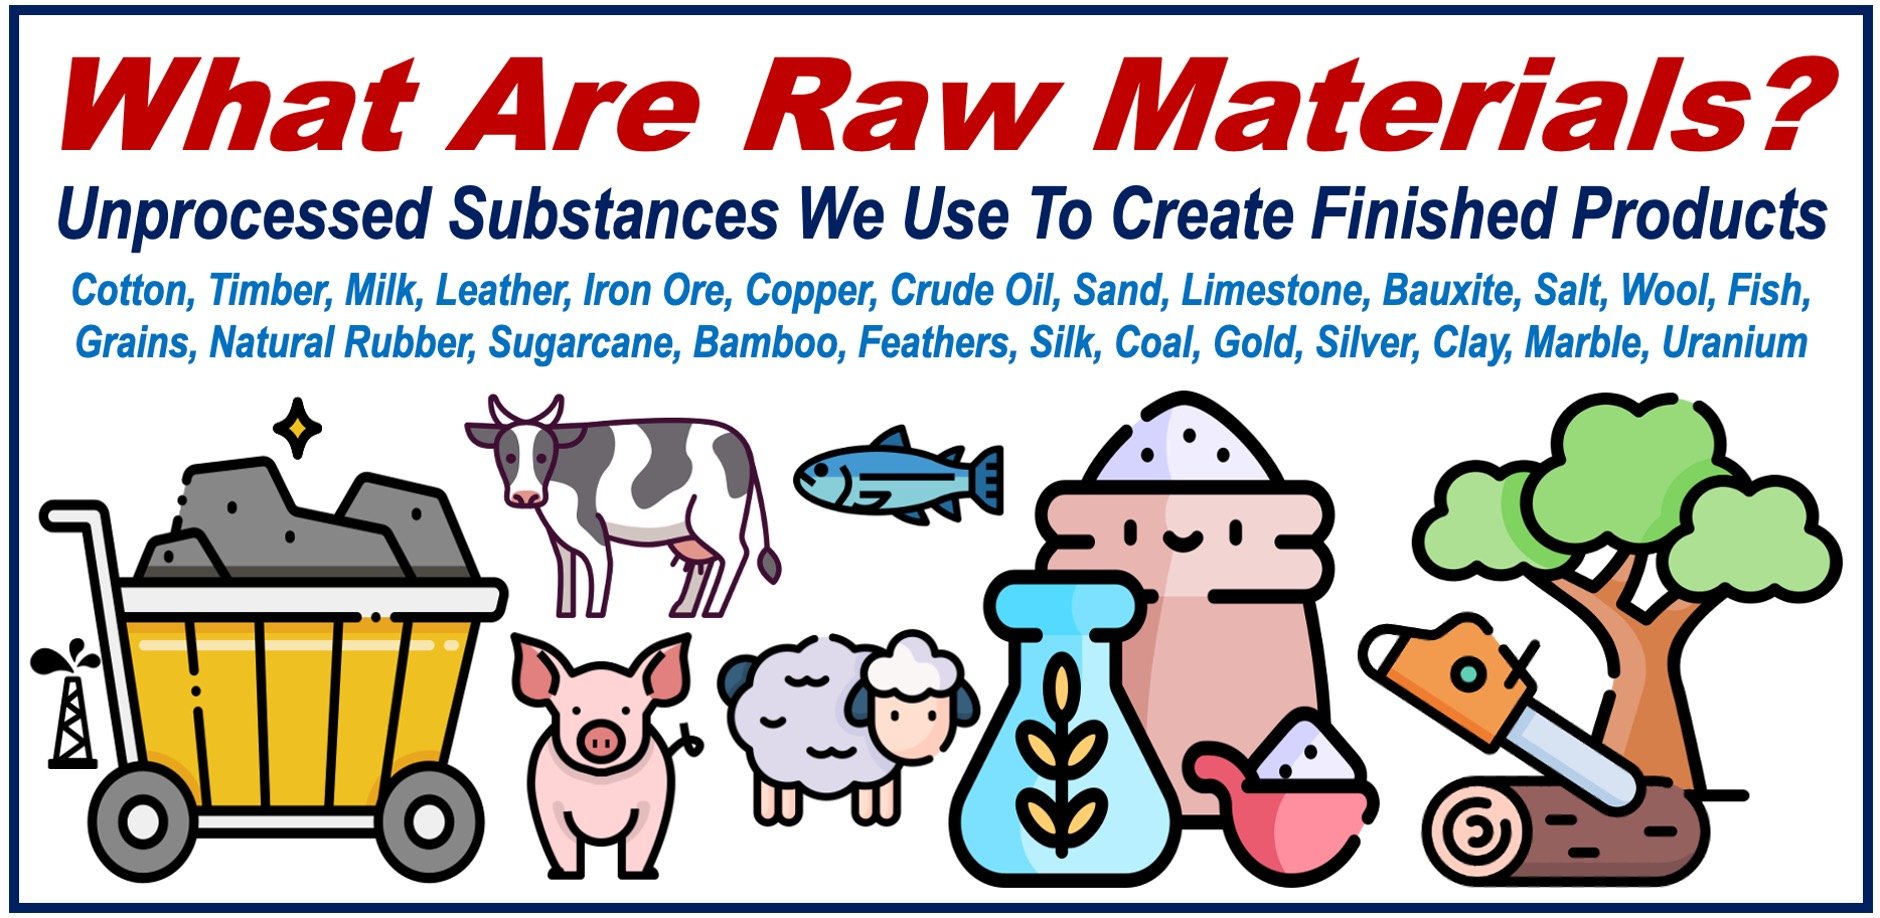 Many examples of RAW MATERIALS and written definition of the term.